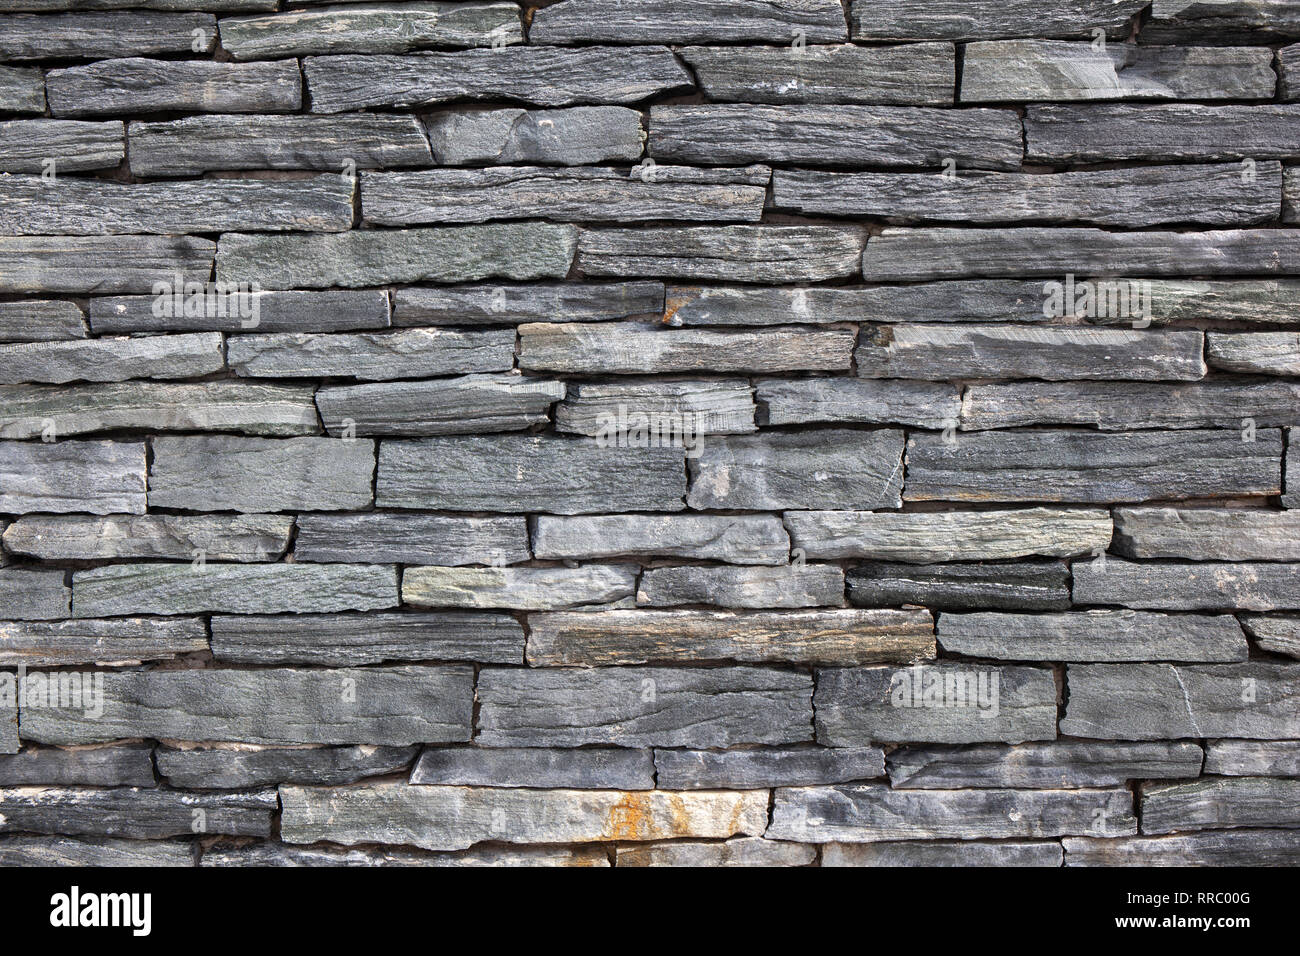 Grey stone granite wall made of stacked pieces stones. Full frame image ...